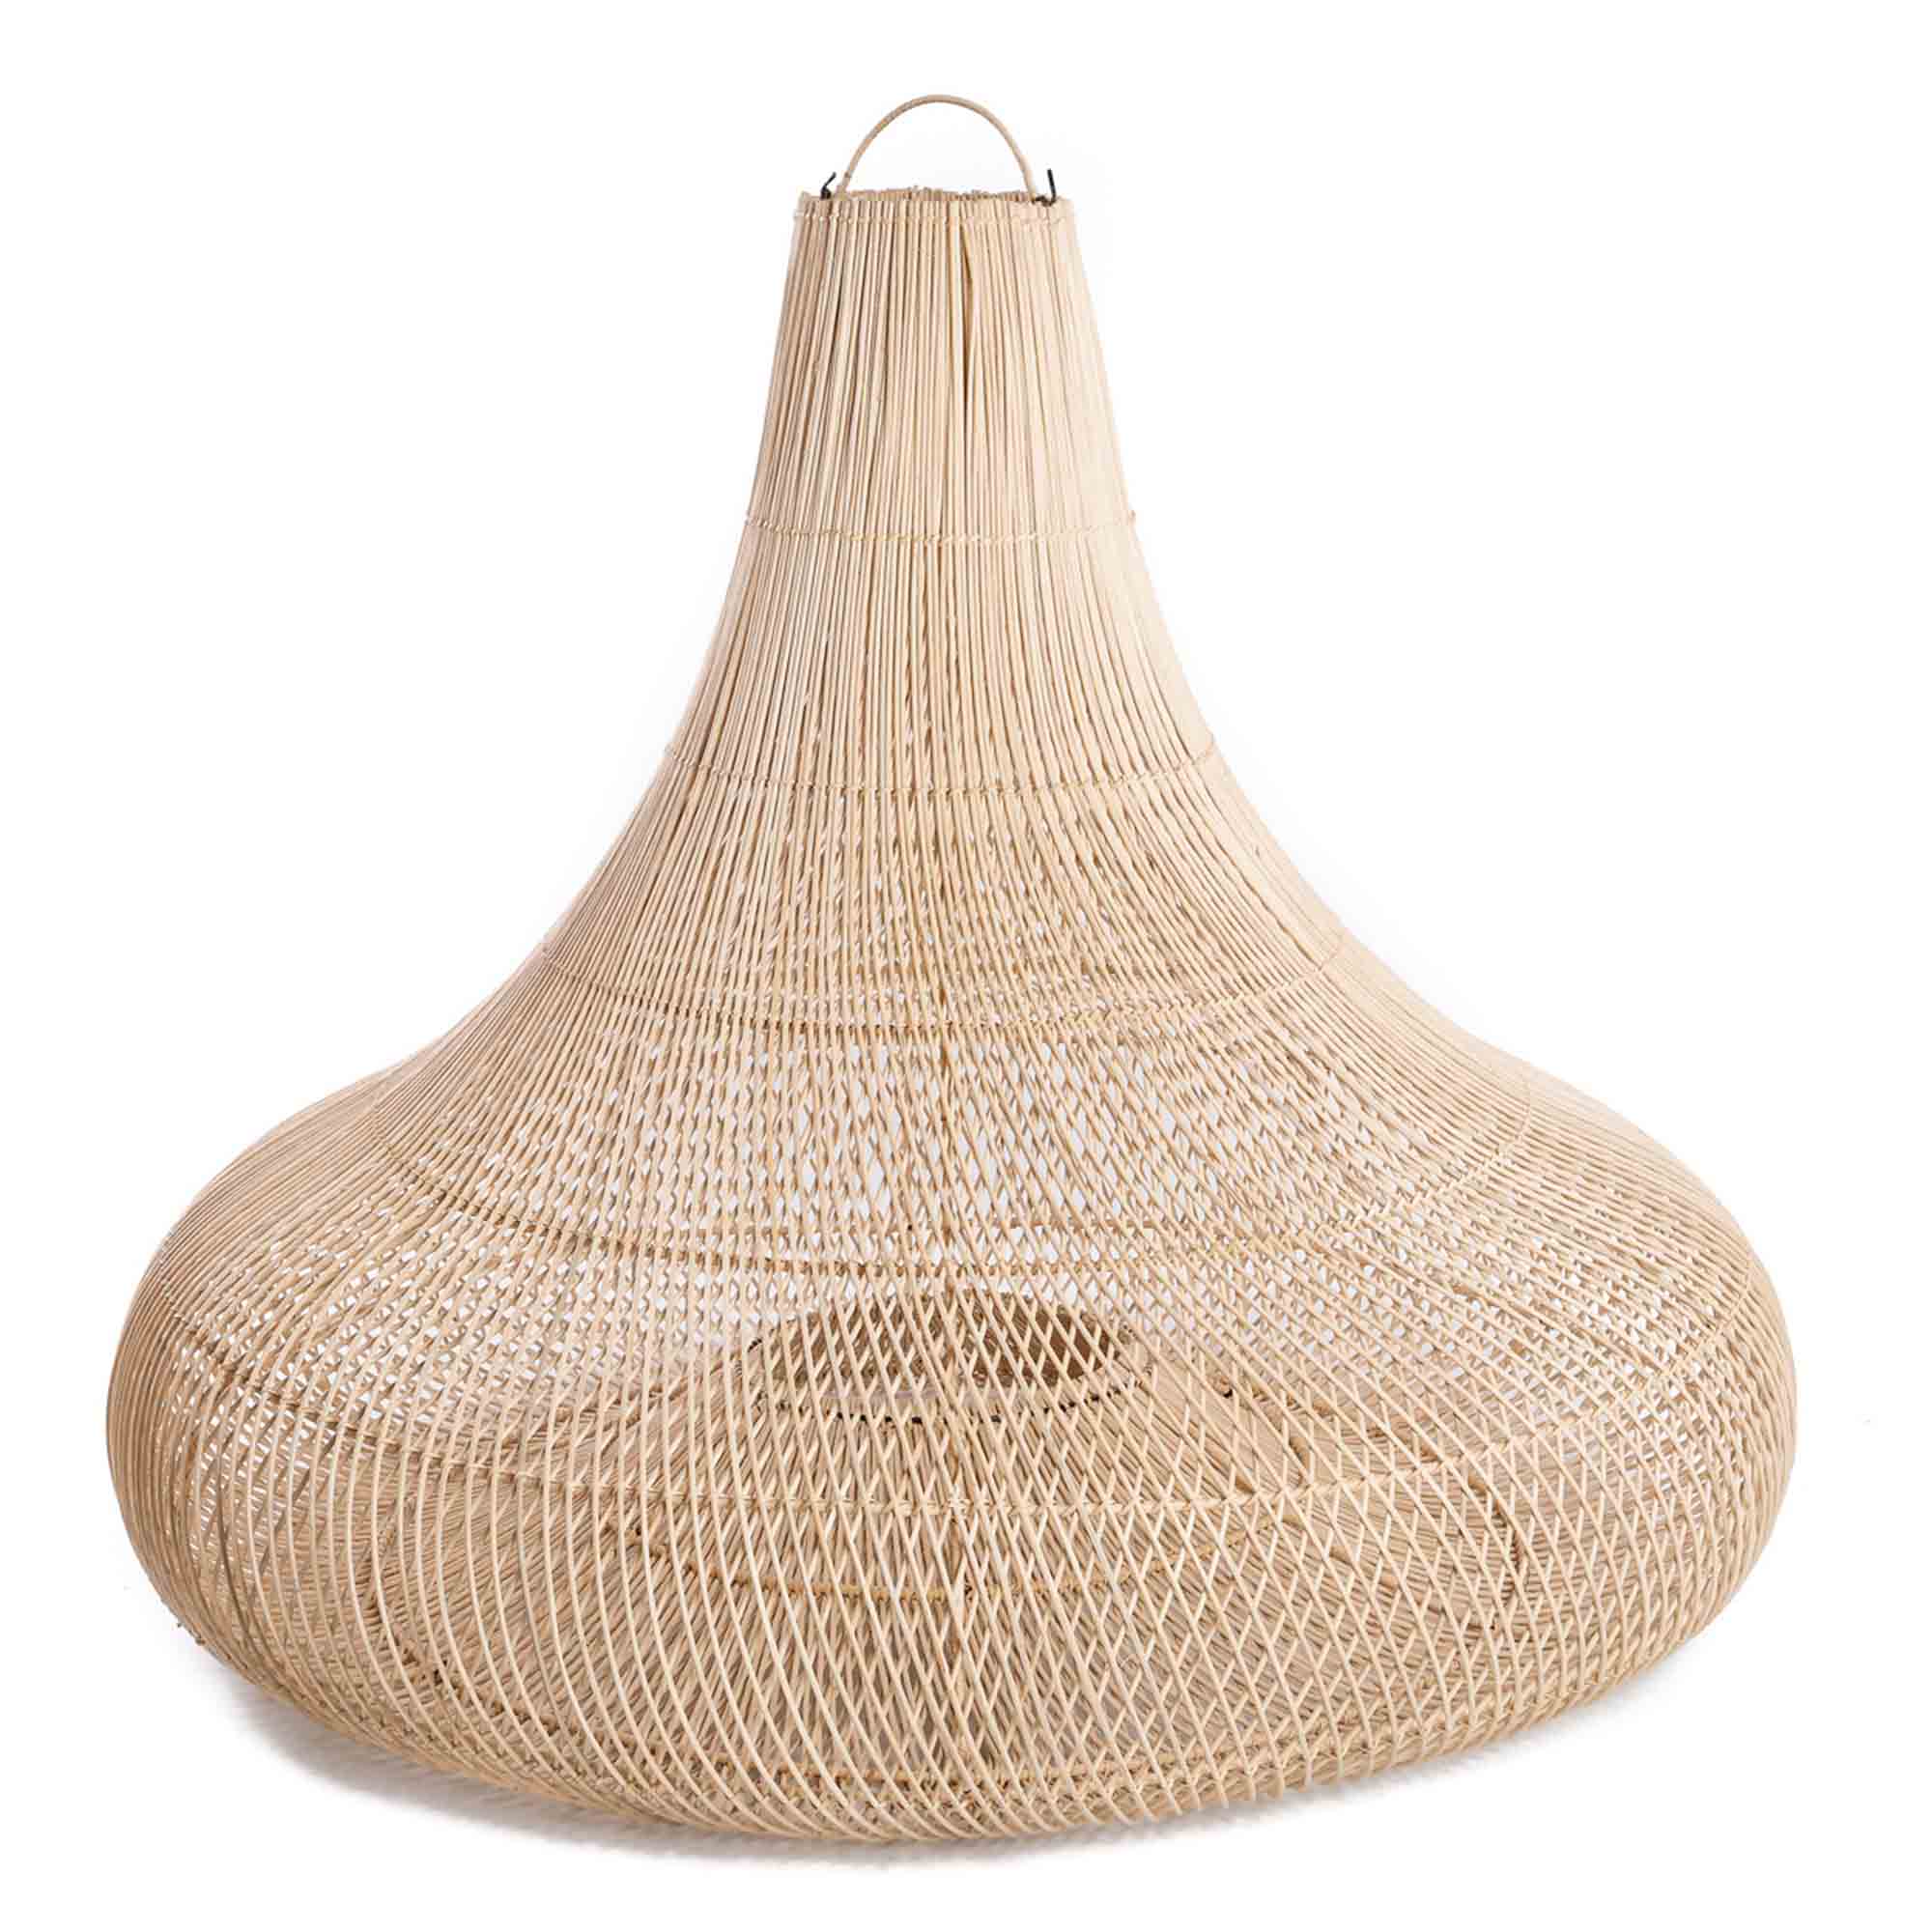 THE SHALA Pendant Lamp Natural. large size, front view